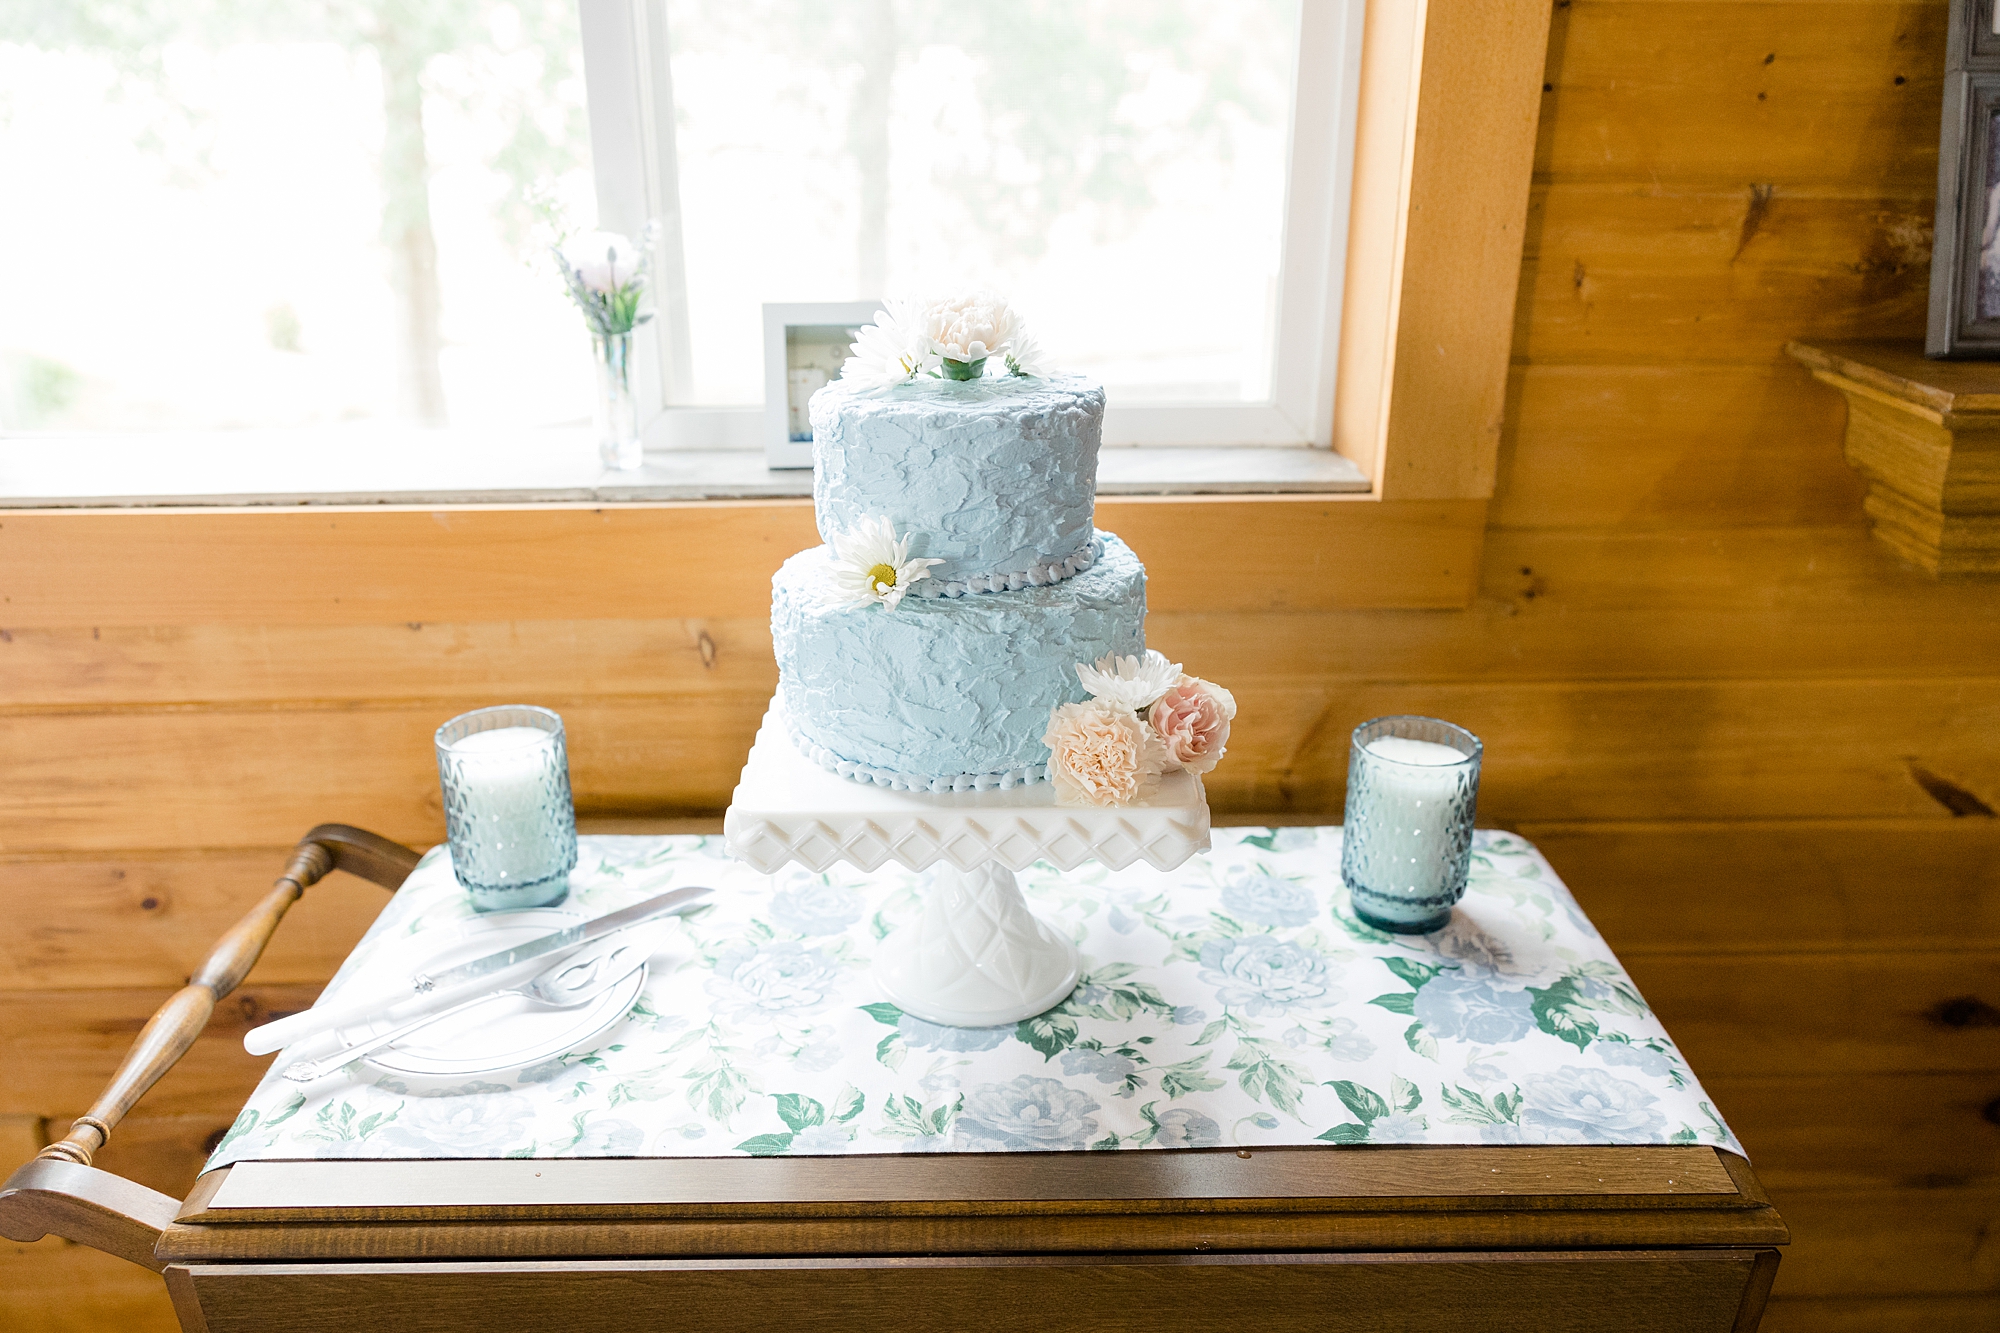 tiered wedding cake with blue icing for rustic New York wedding reception